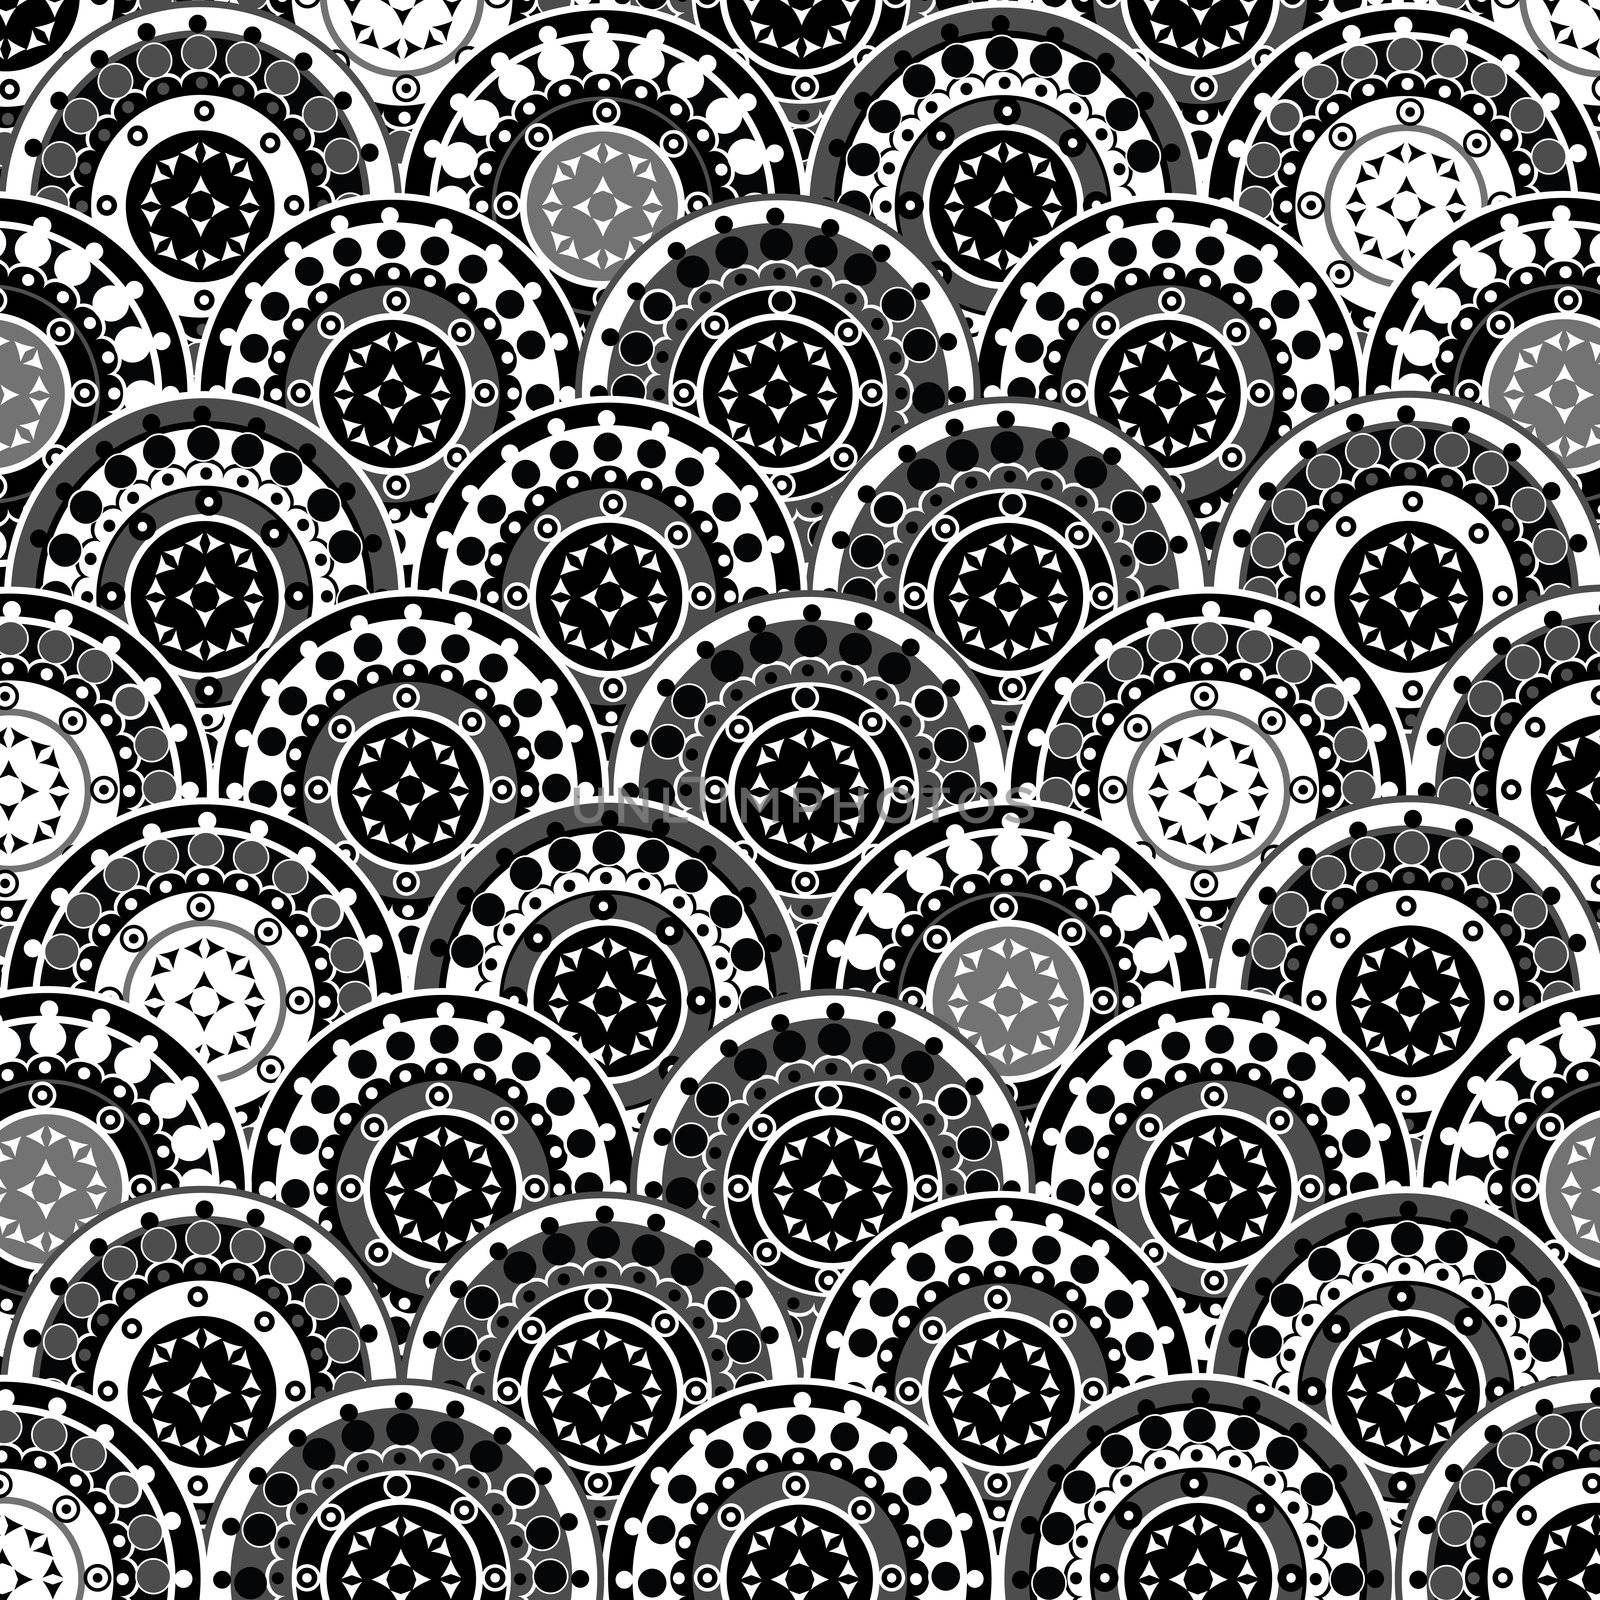 Oriental flowers background in black and white by hibrida13